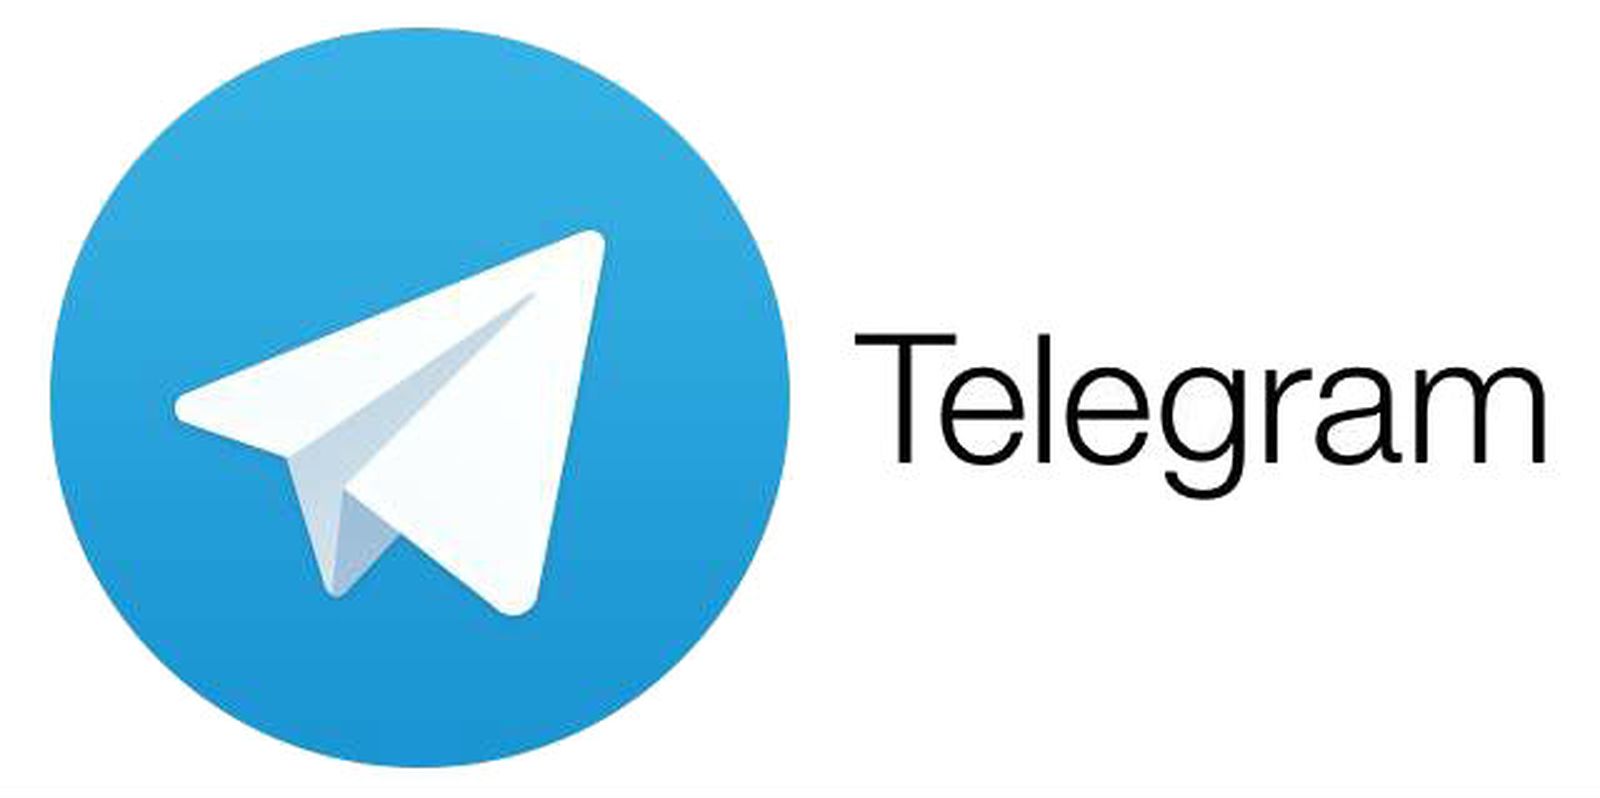 Telegram: How Does it Works? Cloud, Encryption and Privacy